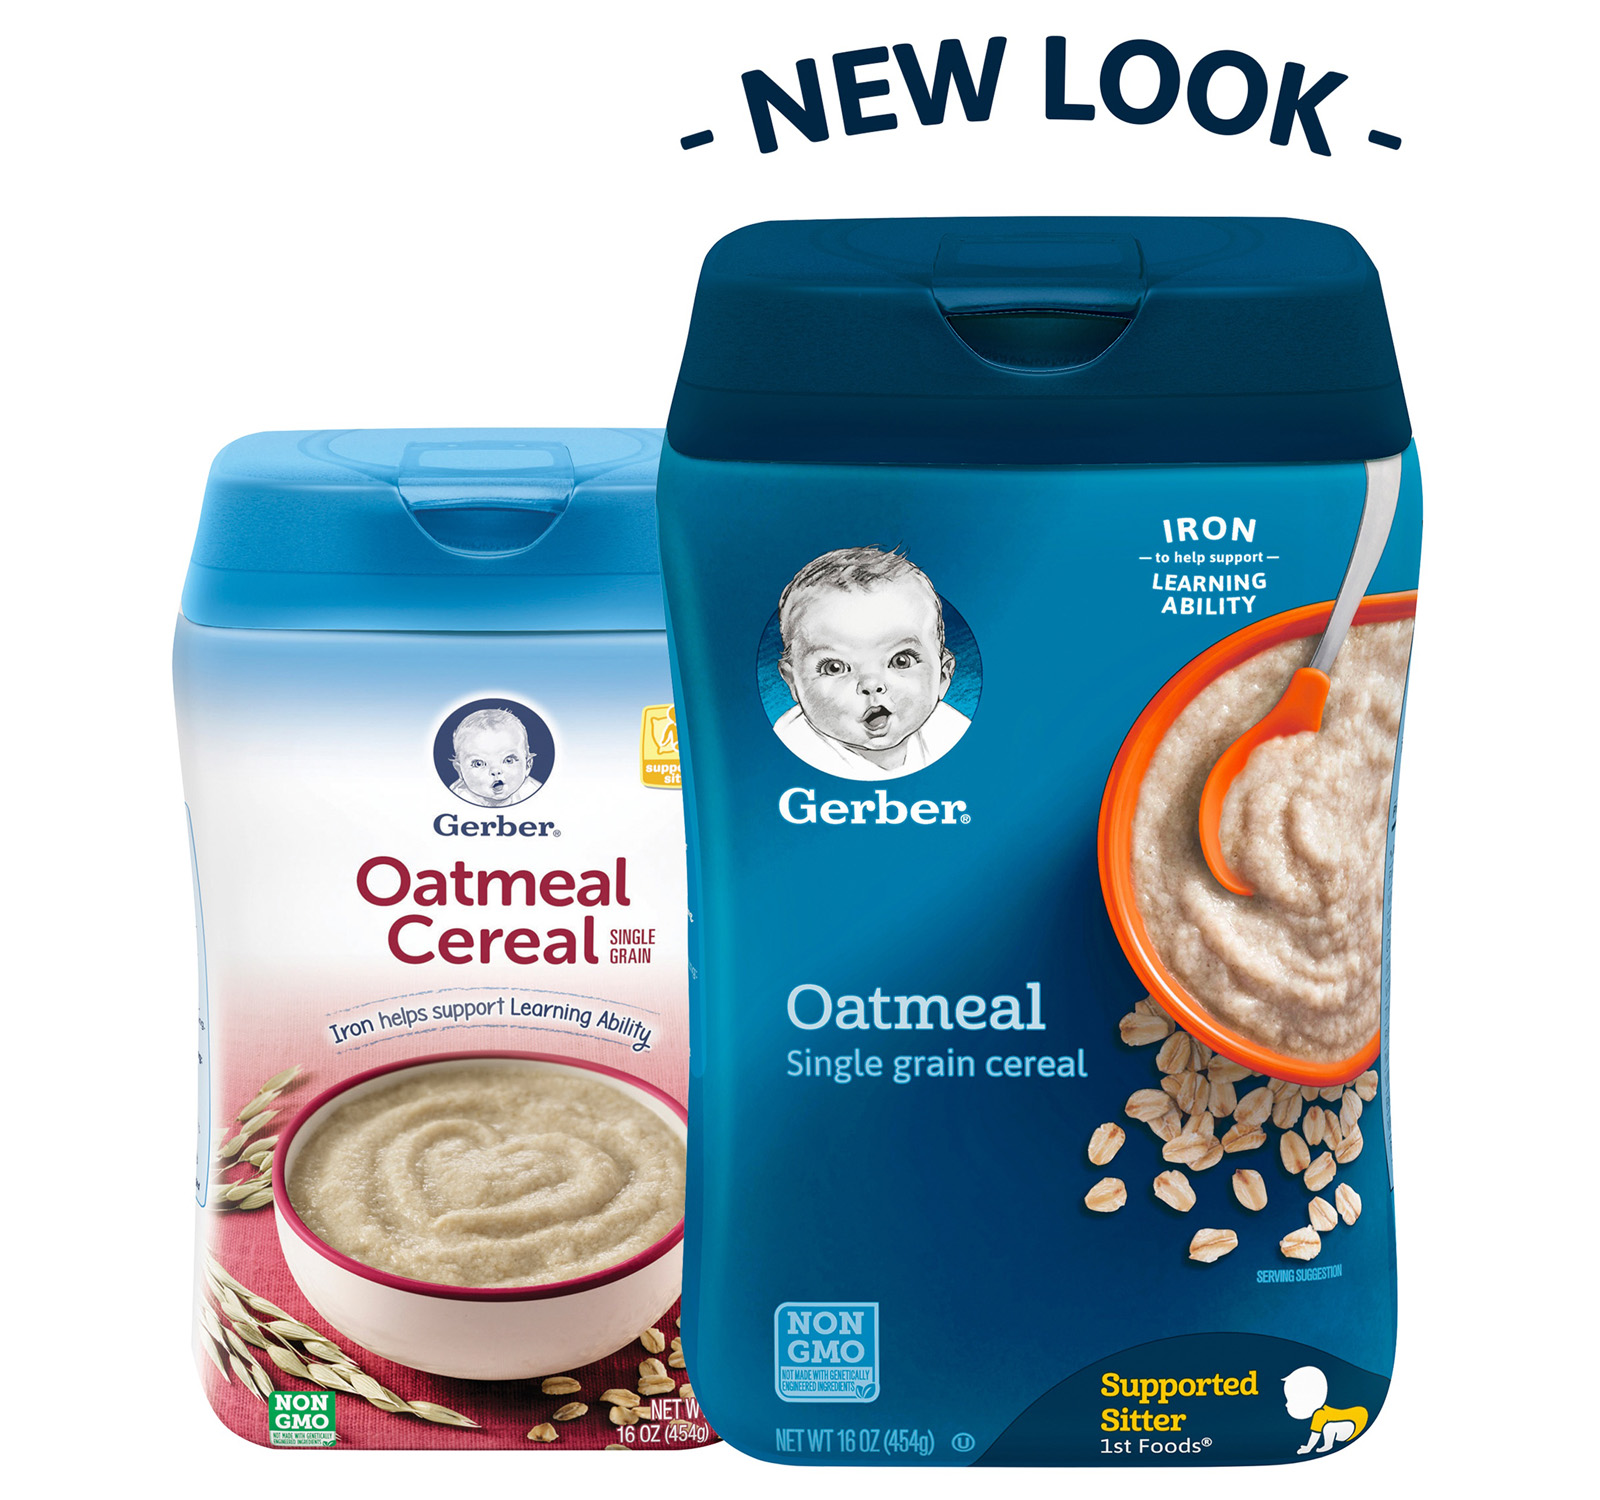 Baby Oatmeal Cereal In Bottle